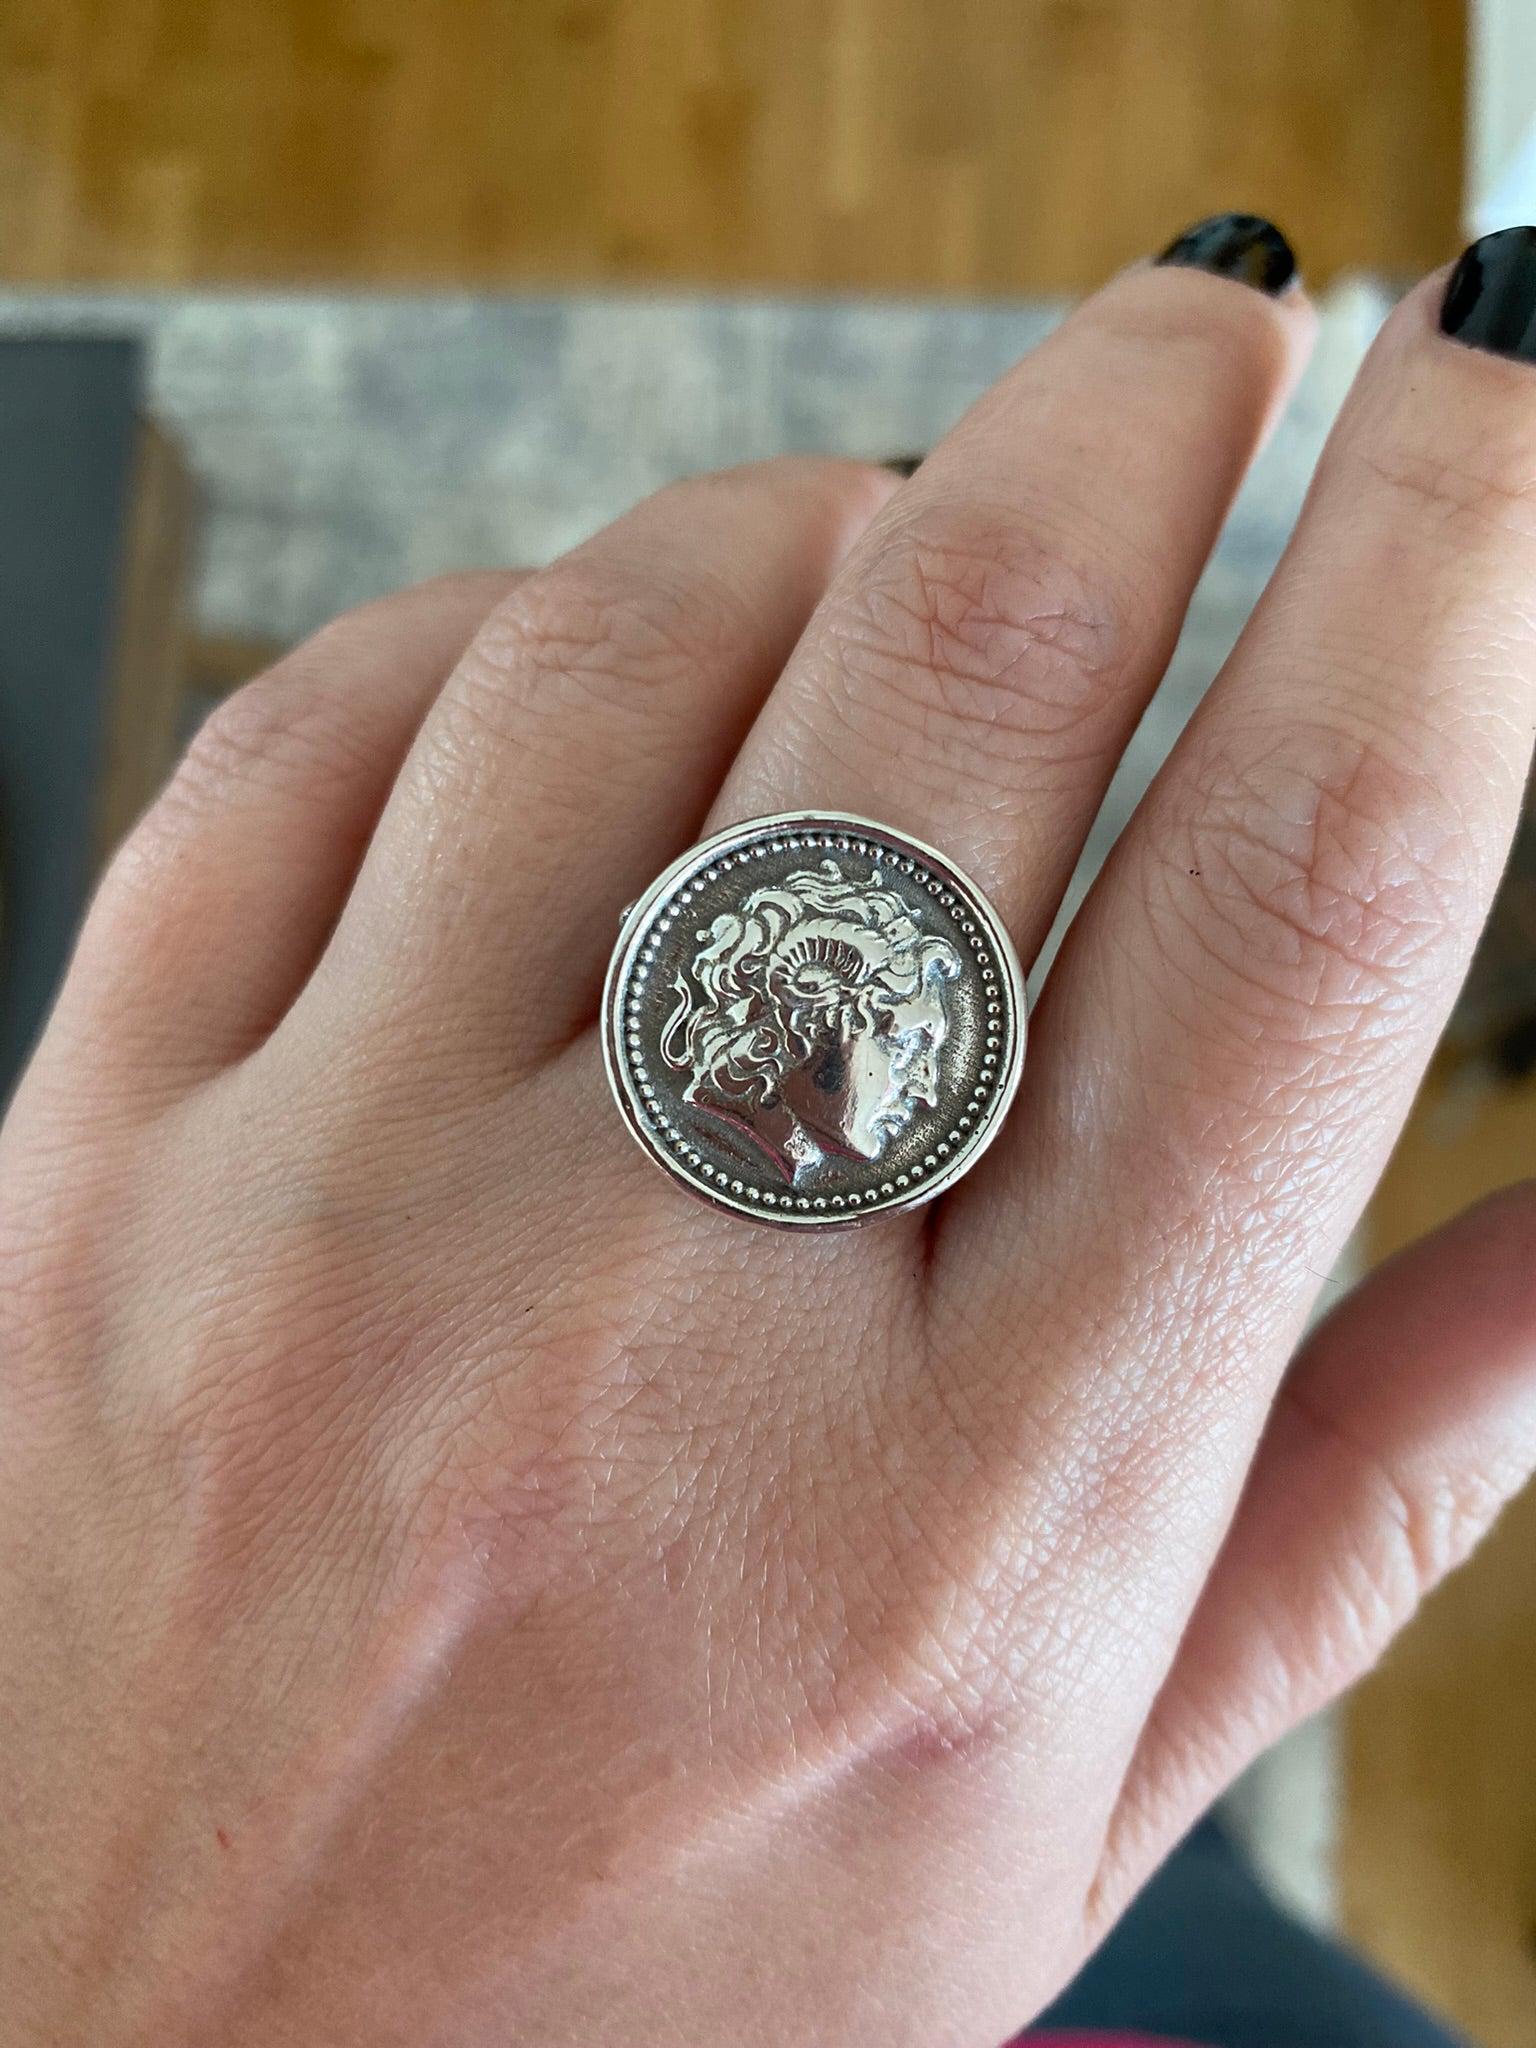 Alexander the Great Portrait Coin Ring in Sterling Silver, Ancient Coin Ring (DT-109)